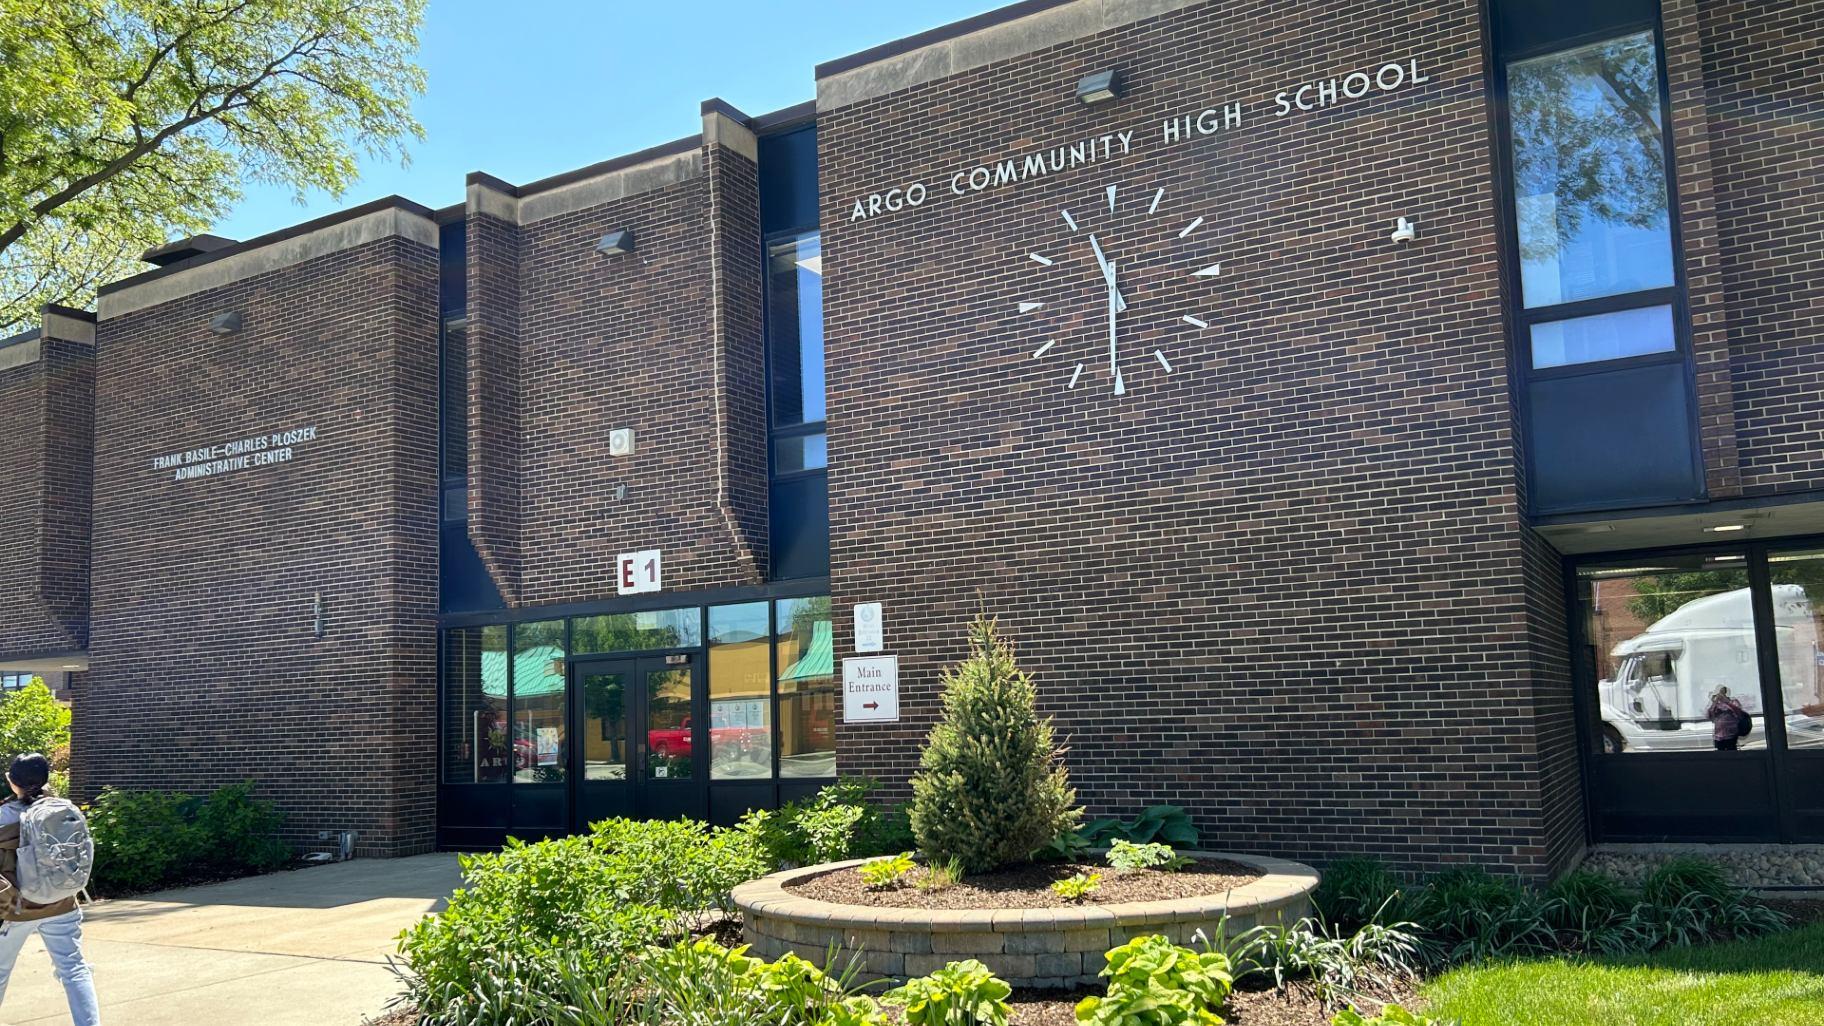 Argo Community High School draws students from Summit, Bedford Park, Bridgeview, Justice, Willow Springs and Hickory Hills. (Jared Rutecki / WTTW News)